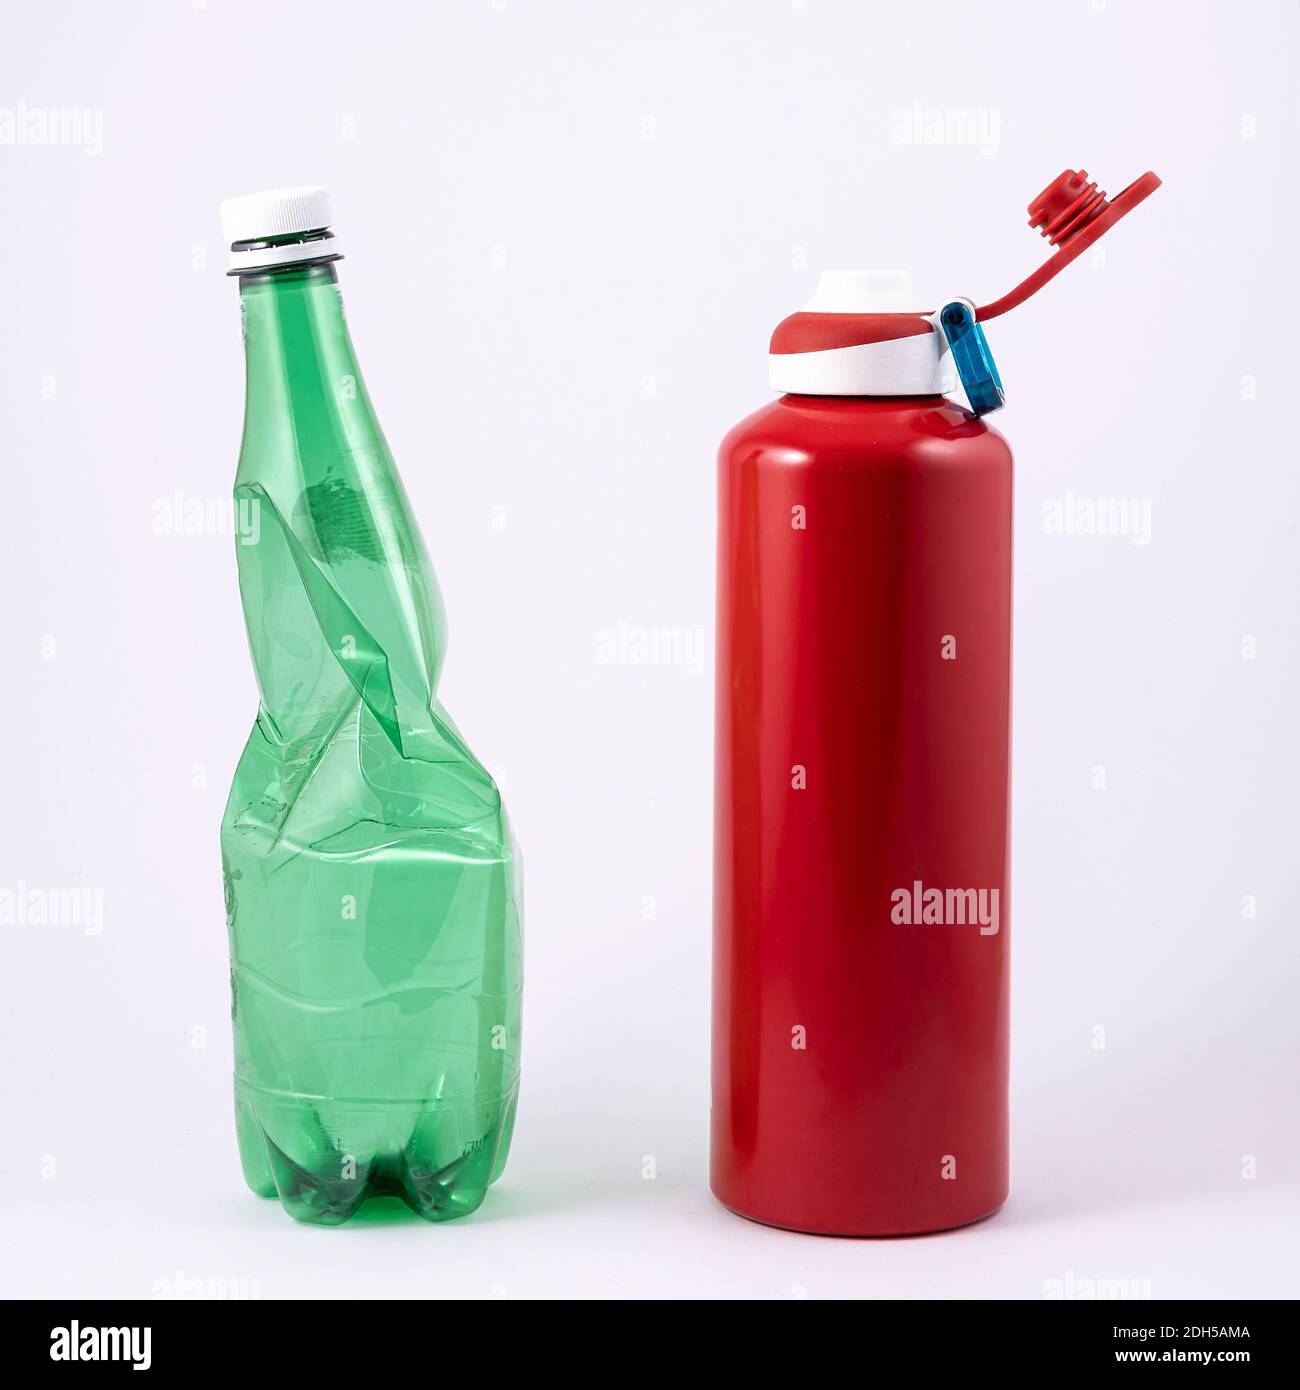 the ecological choice: from the plastic bottle to the reusable aluminum bottle. Stock Photo